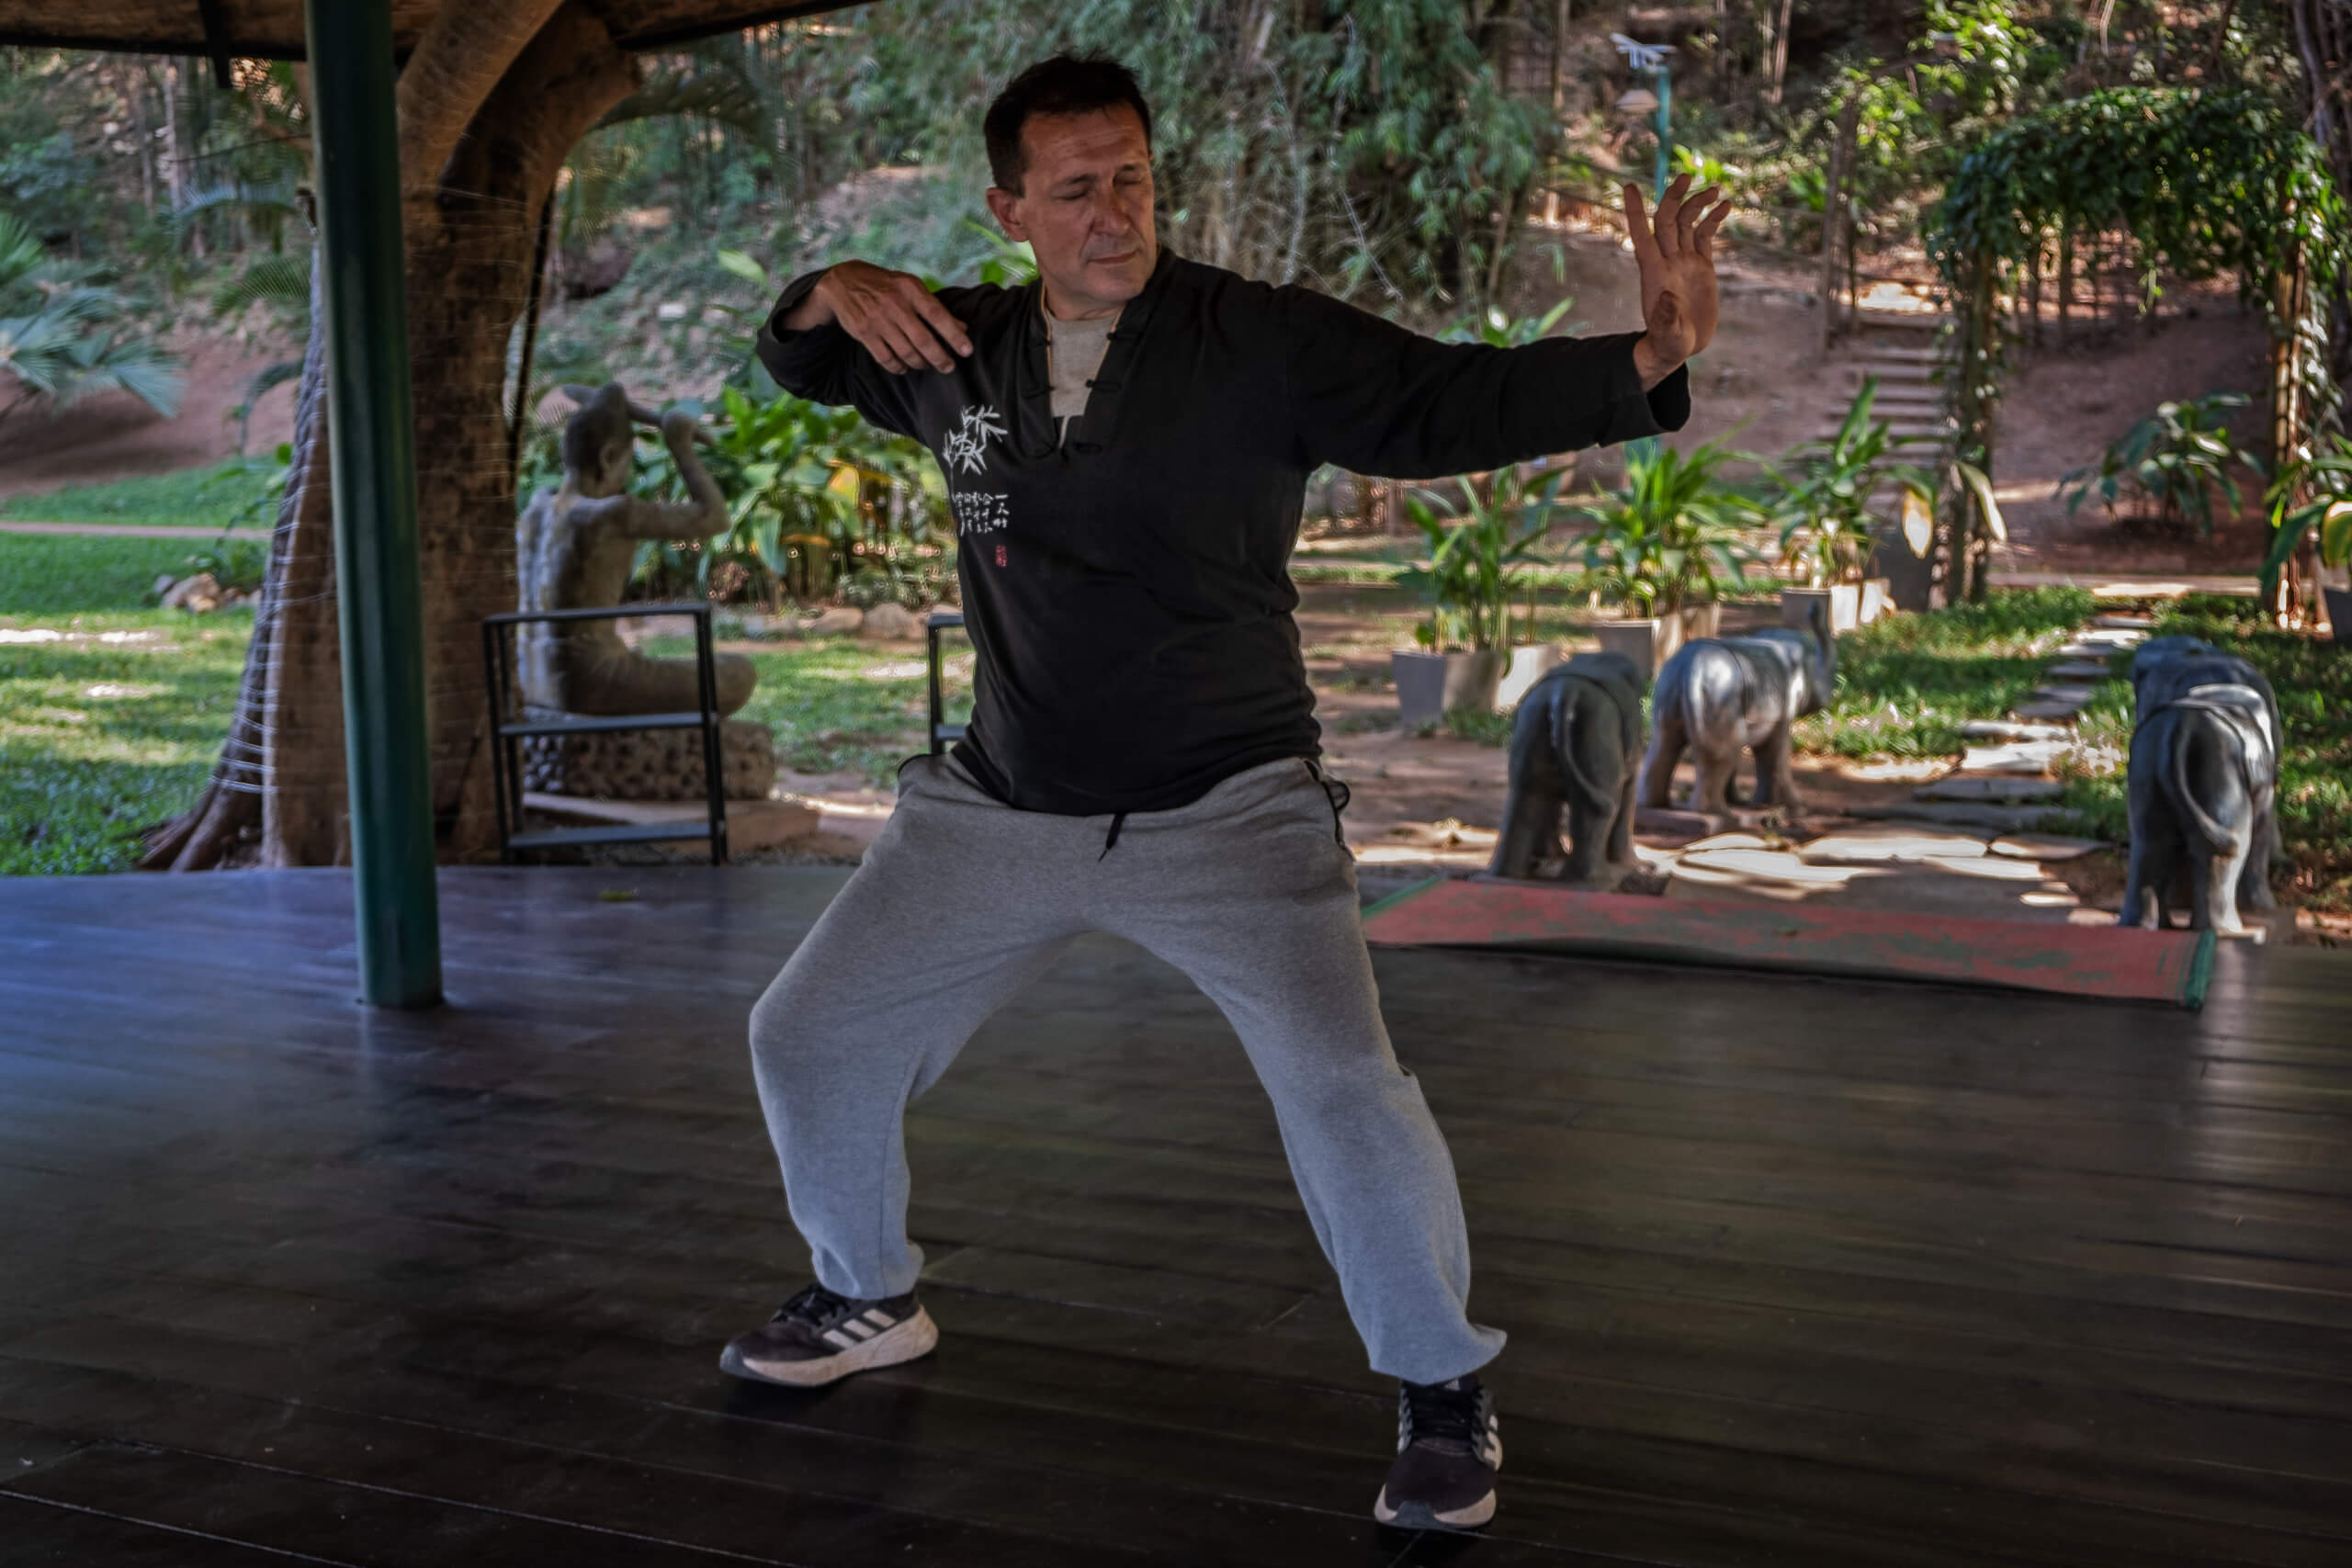 Man practicing qi gong on a wooden deck, cultivating balance and energy flow.